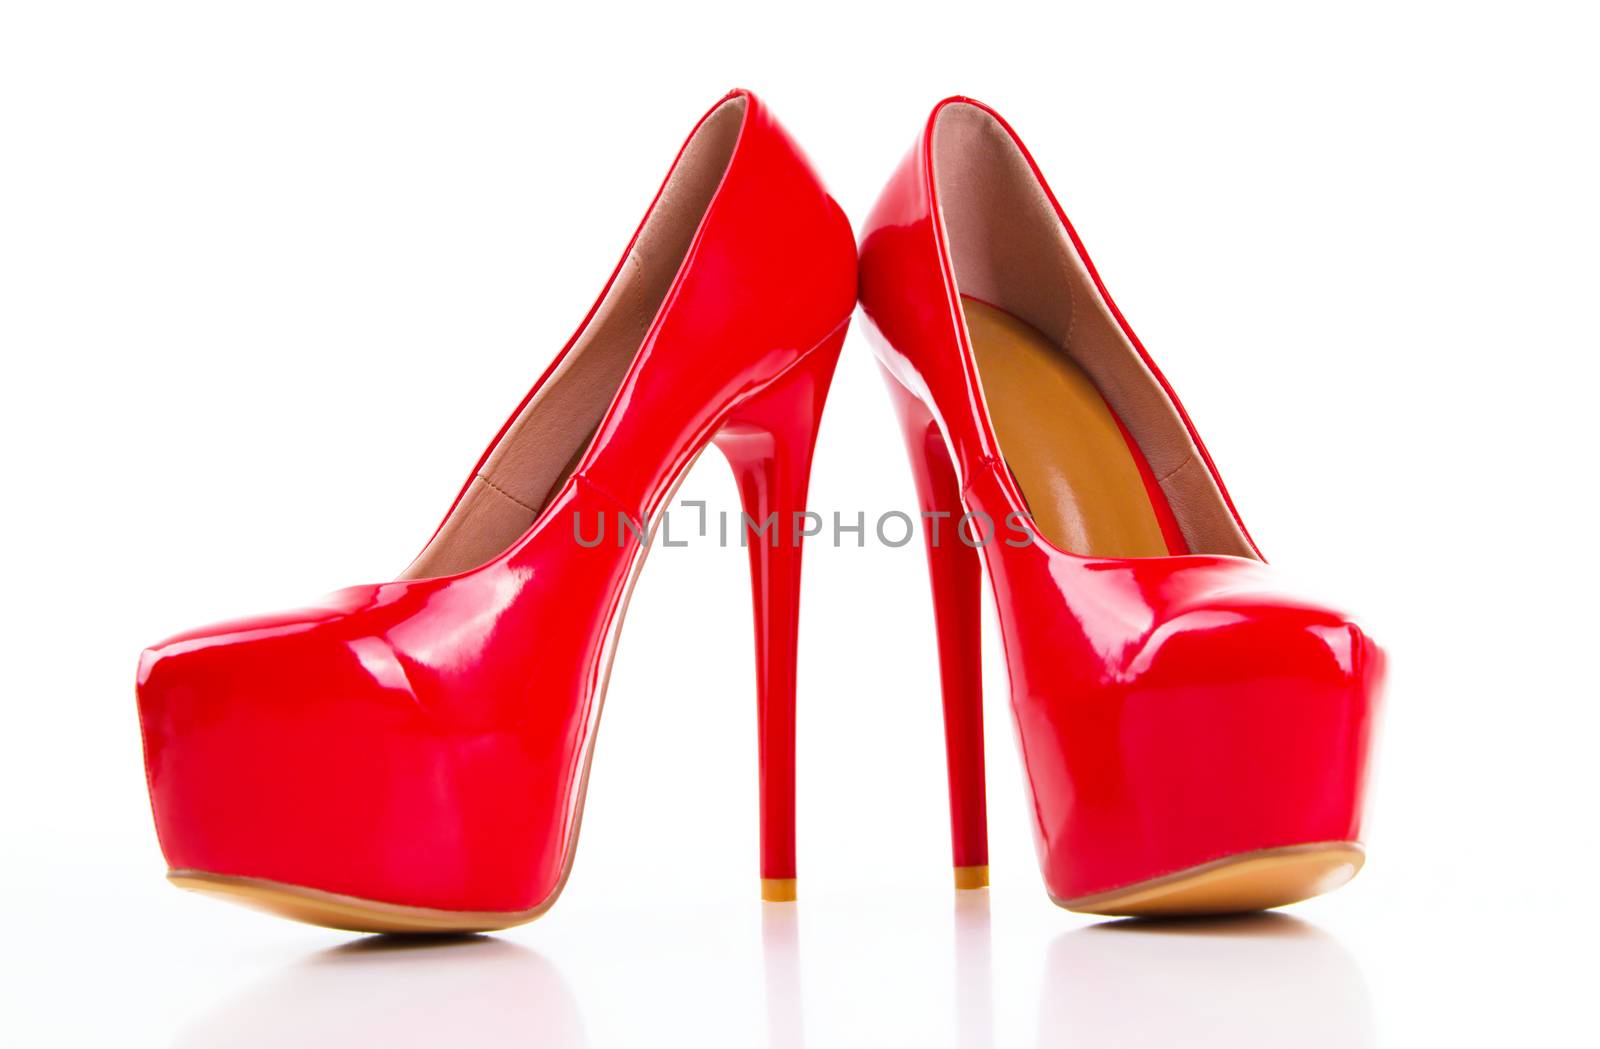 Red high heel women shoes isolated on white background